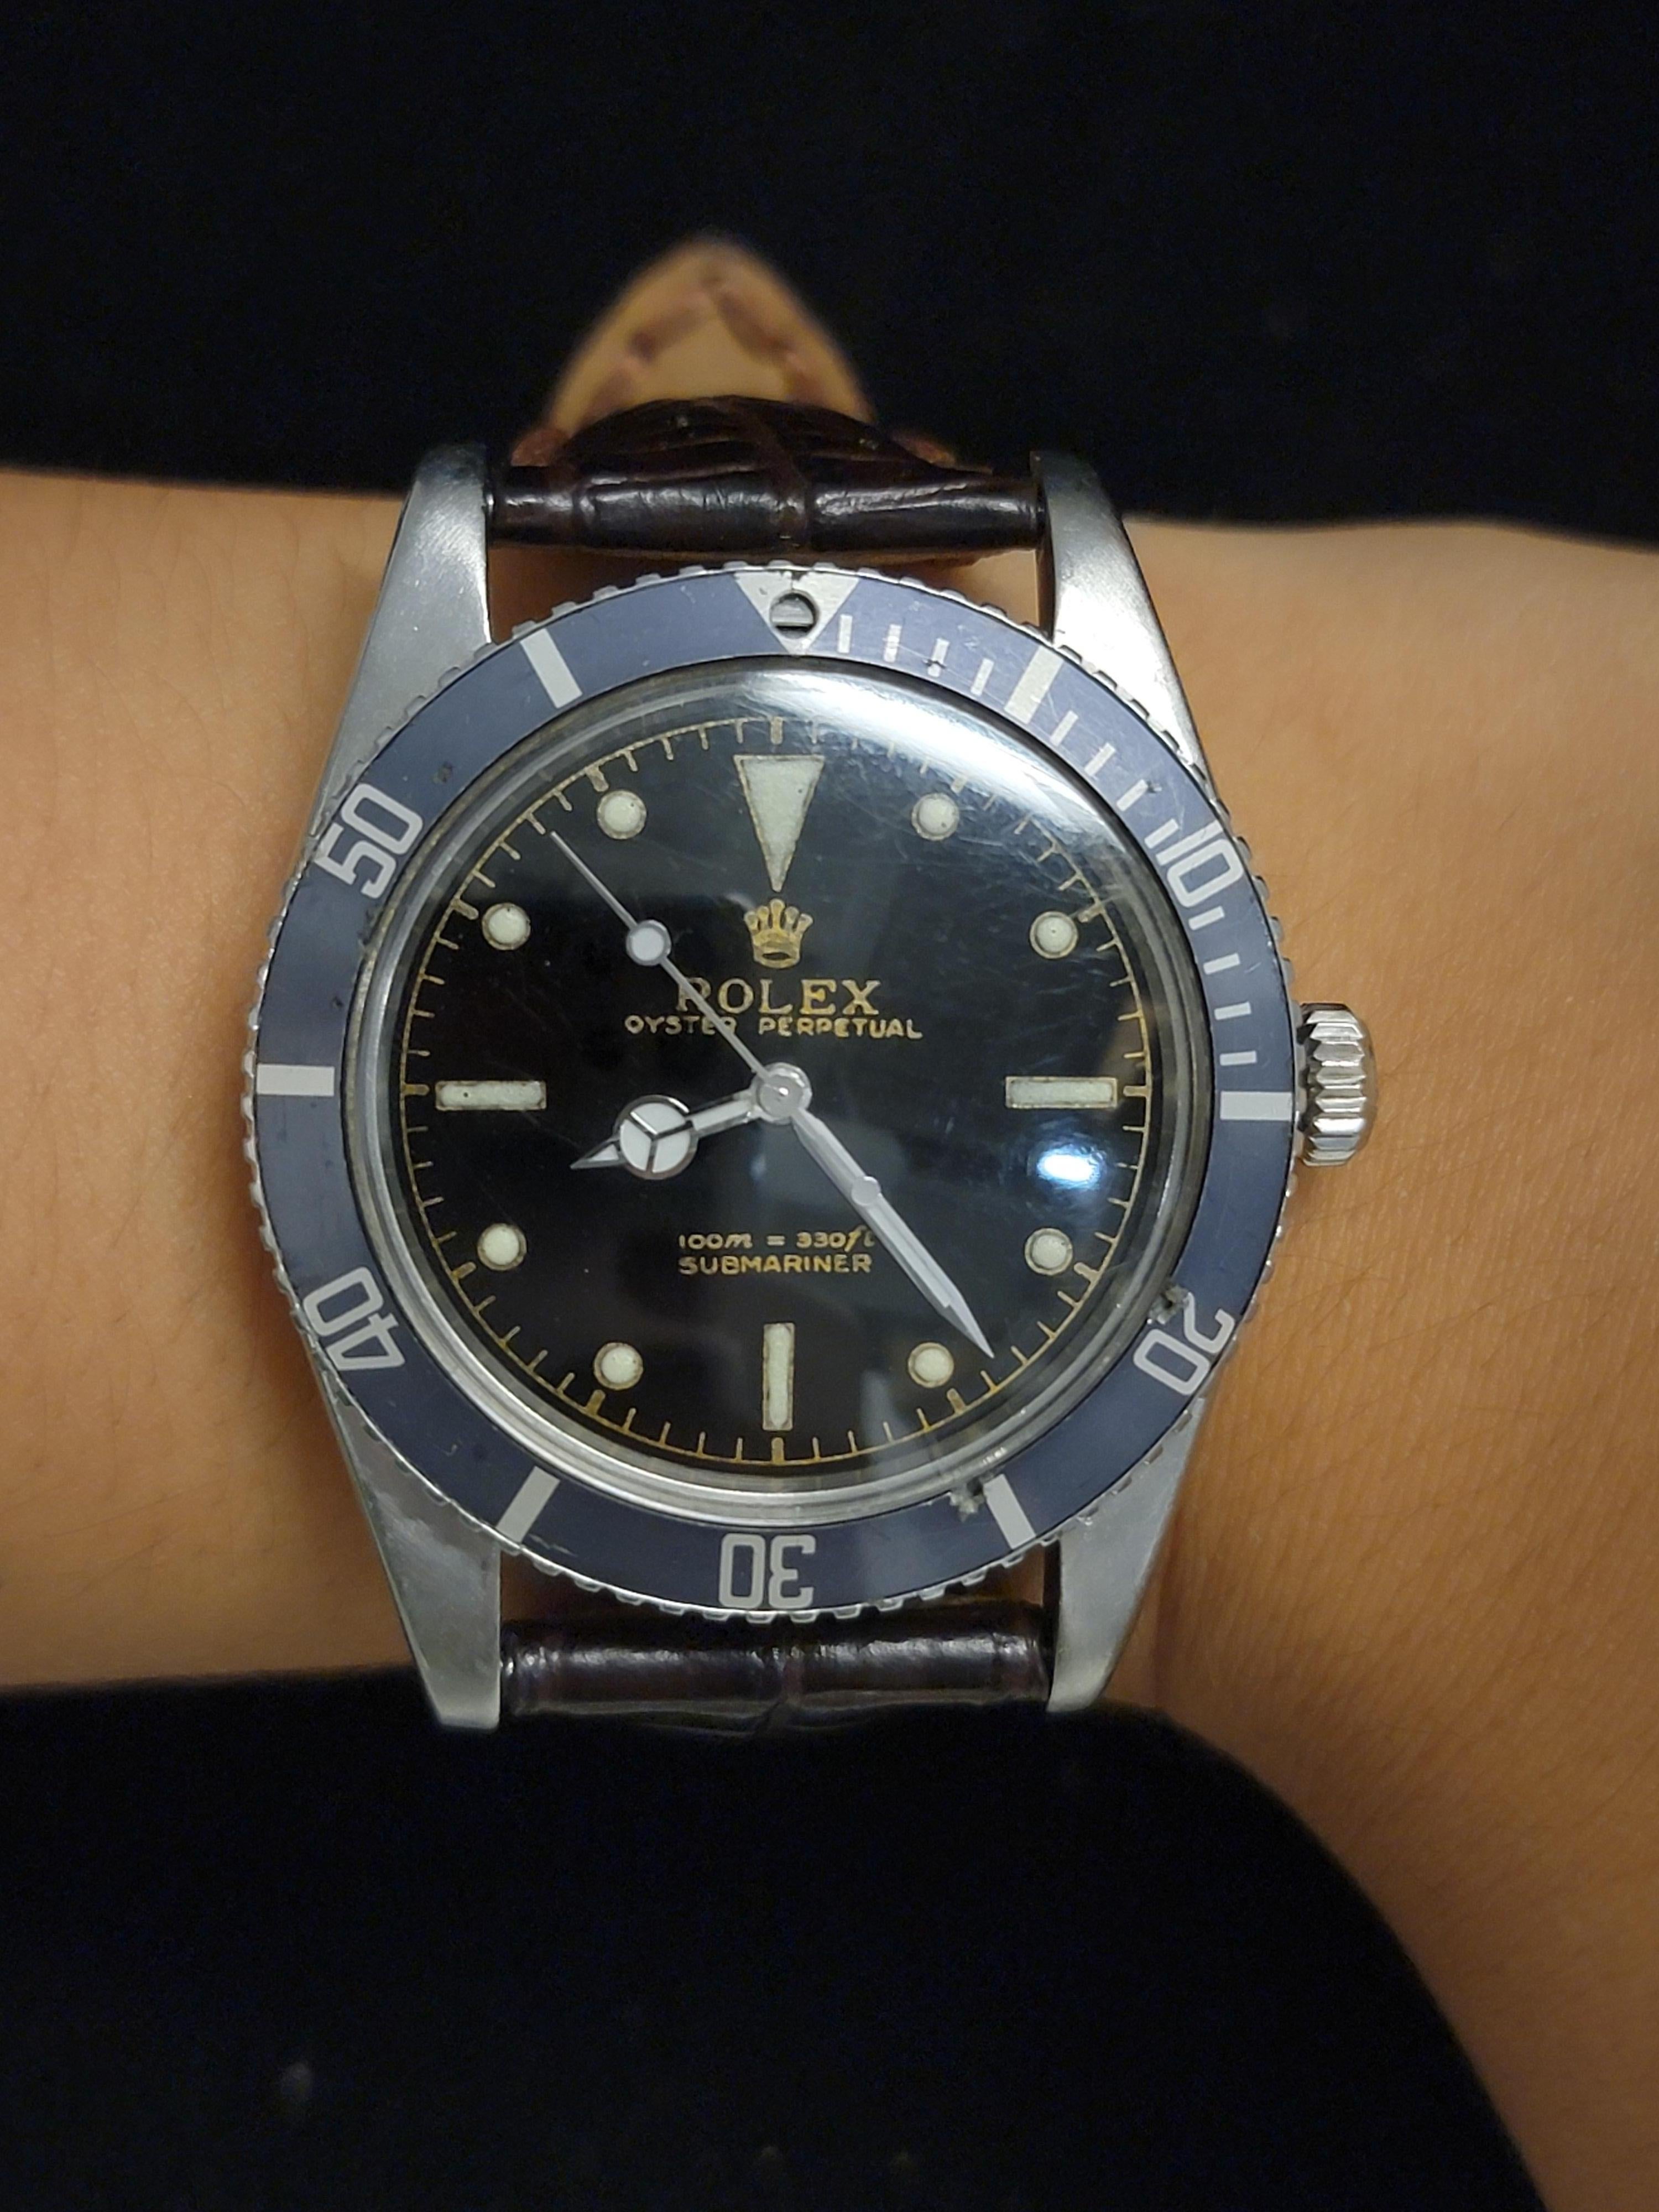 Rare Rolex James Bond Submariner circa 1966 Watch Ref. #5513 In Good Condition For Sale In New York, NY